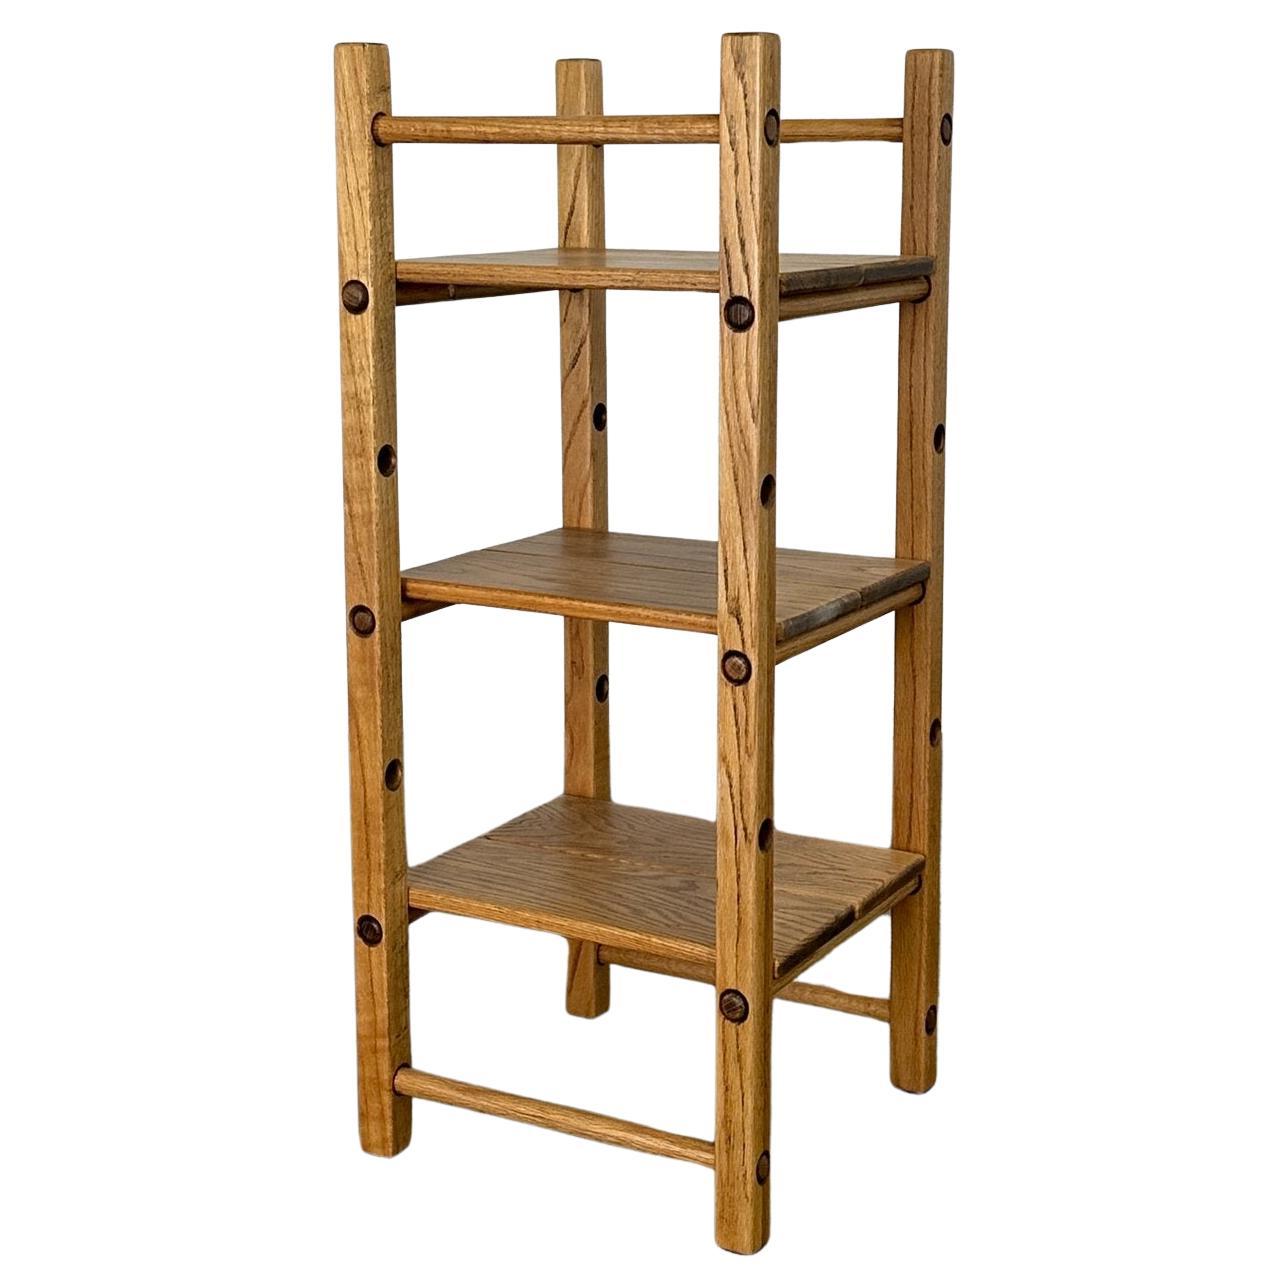 Dowel system tiered shelving unit For Sale